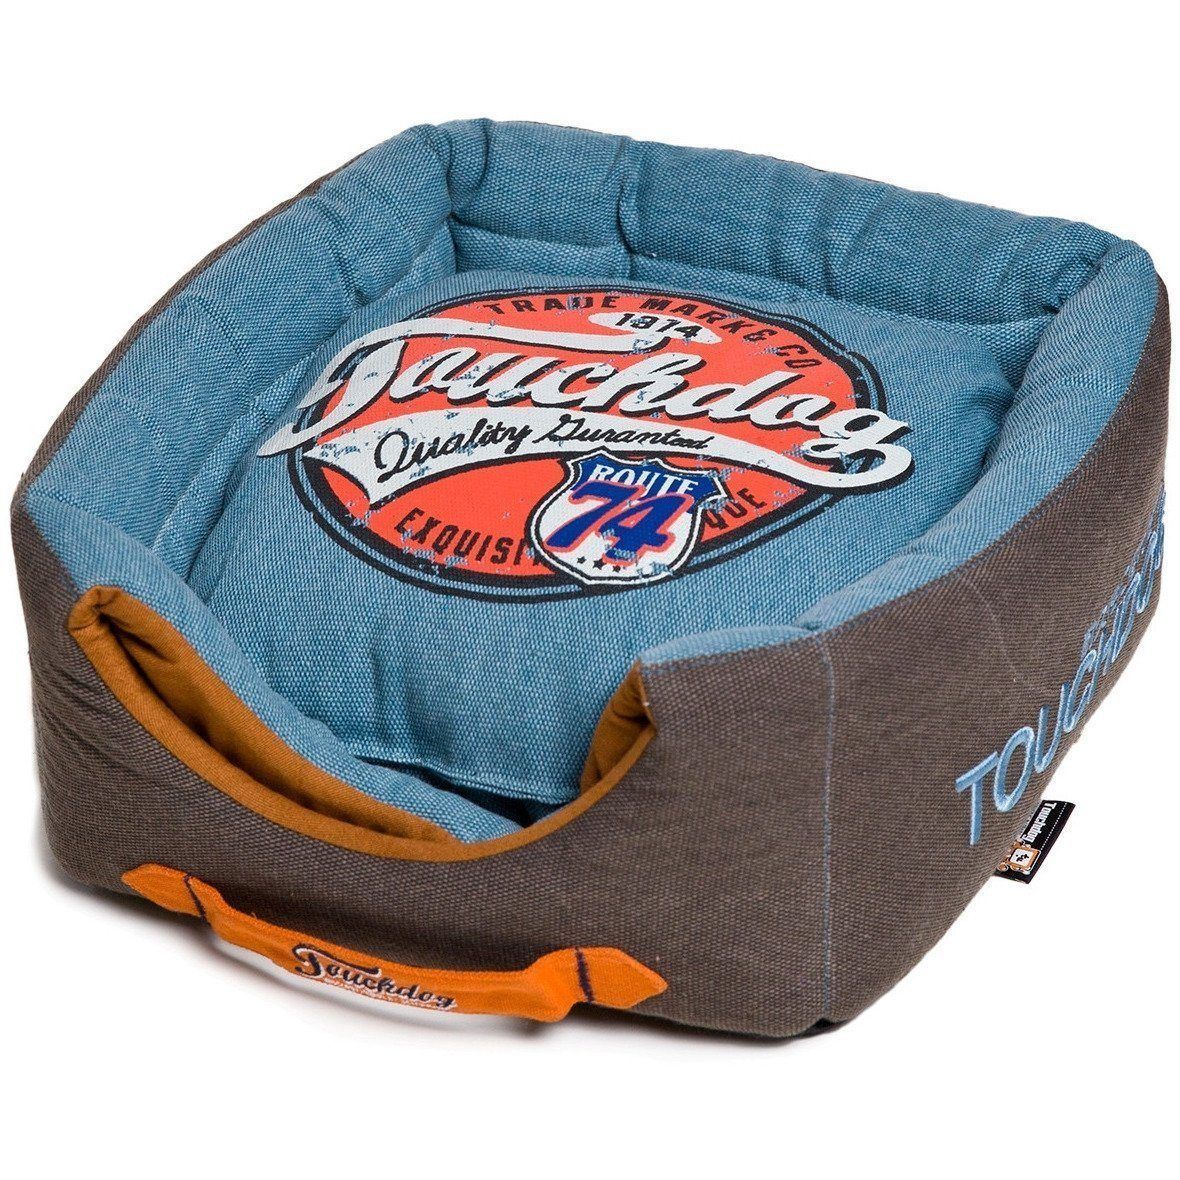 Touchdog ® 'Vintage Squared' 2-in-1 Convertible and Collapsible Dog and Cat Bed Denim Blue, Mud Brown 